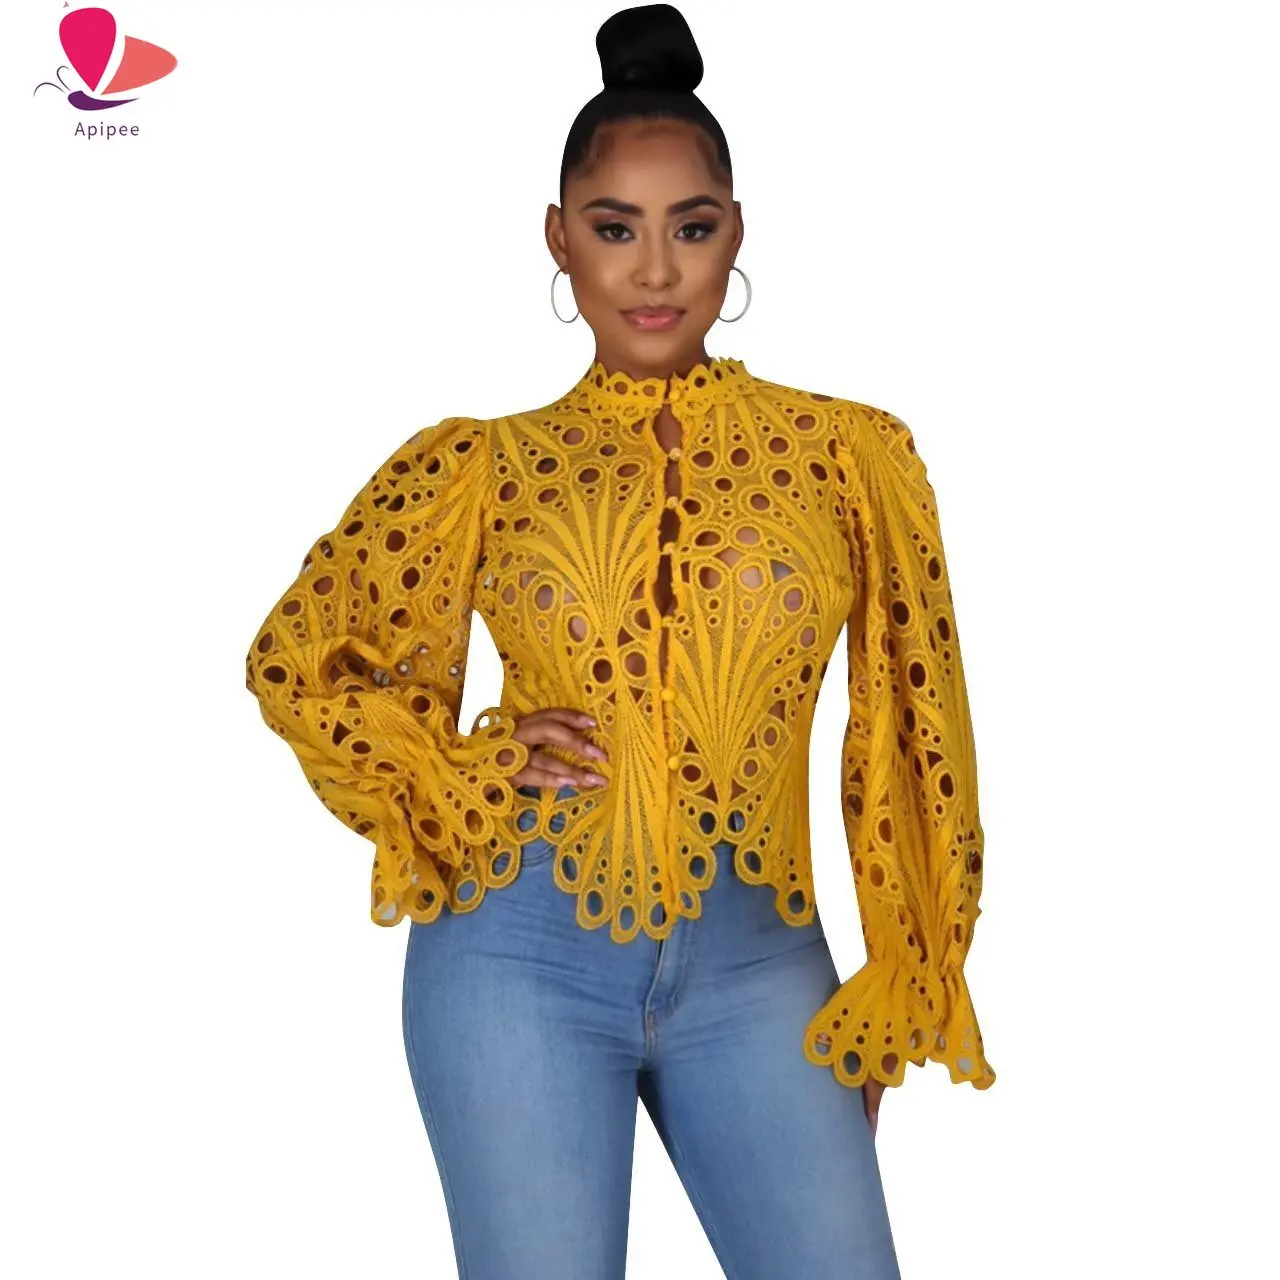 

2023 New Elegant Long Sleeve Hollow Out Mesh Lace Shirt Sheer See Through Top Blouse Clothing Dashiki African Shirts For Women